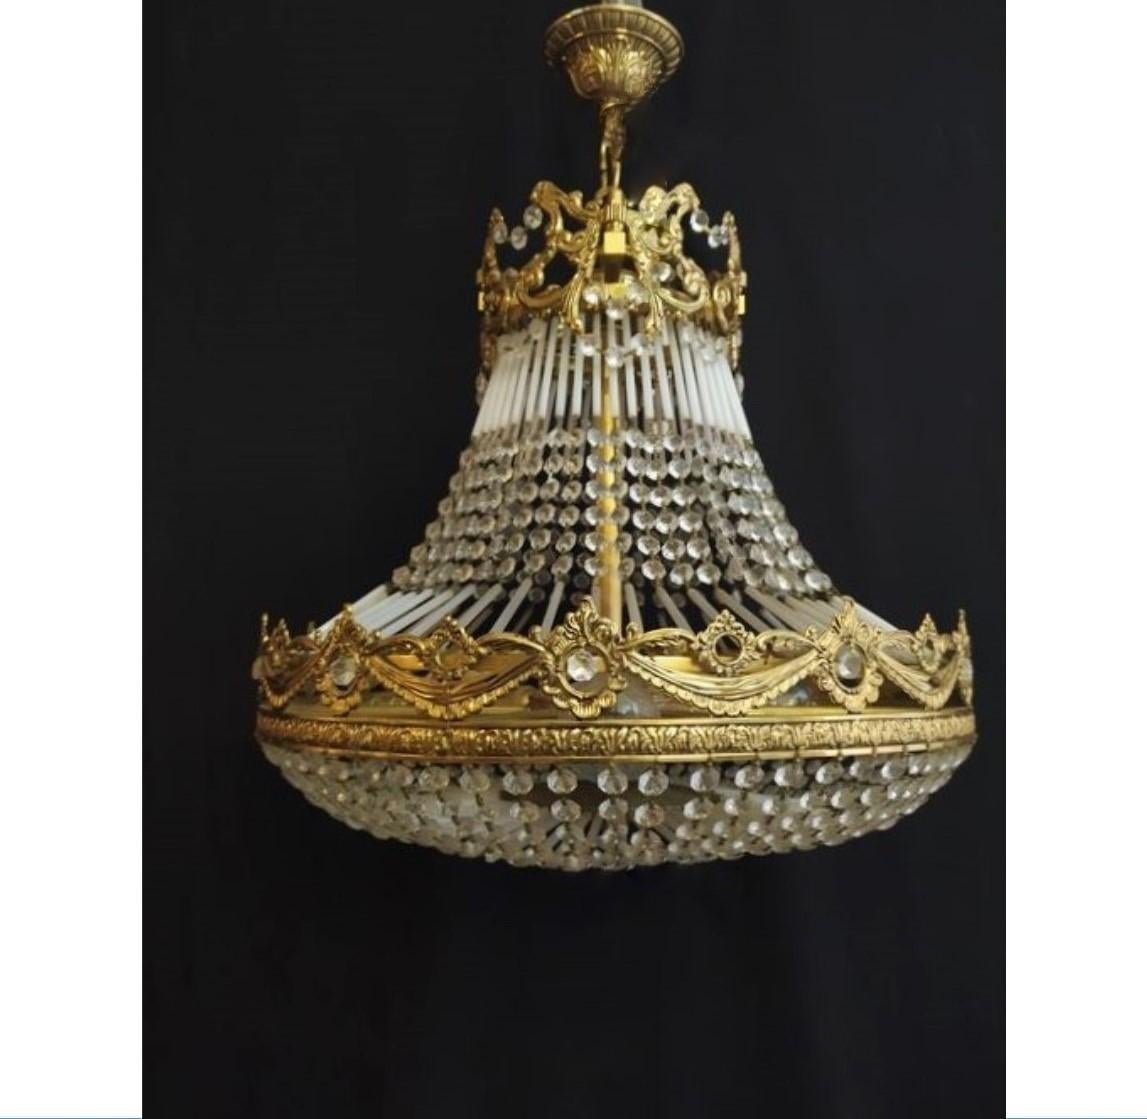 A wonderful Arte deco Period crystal and bronze chandelier, with glass rods connectiting the crystal chains, France, 1930s. The chandelier is in very good vintage condition, beautiful aged patina to bronze, crystals and glass rods complete, cleaned